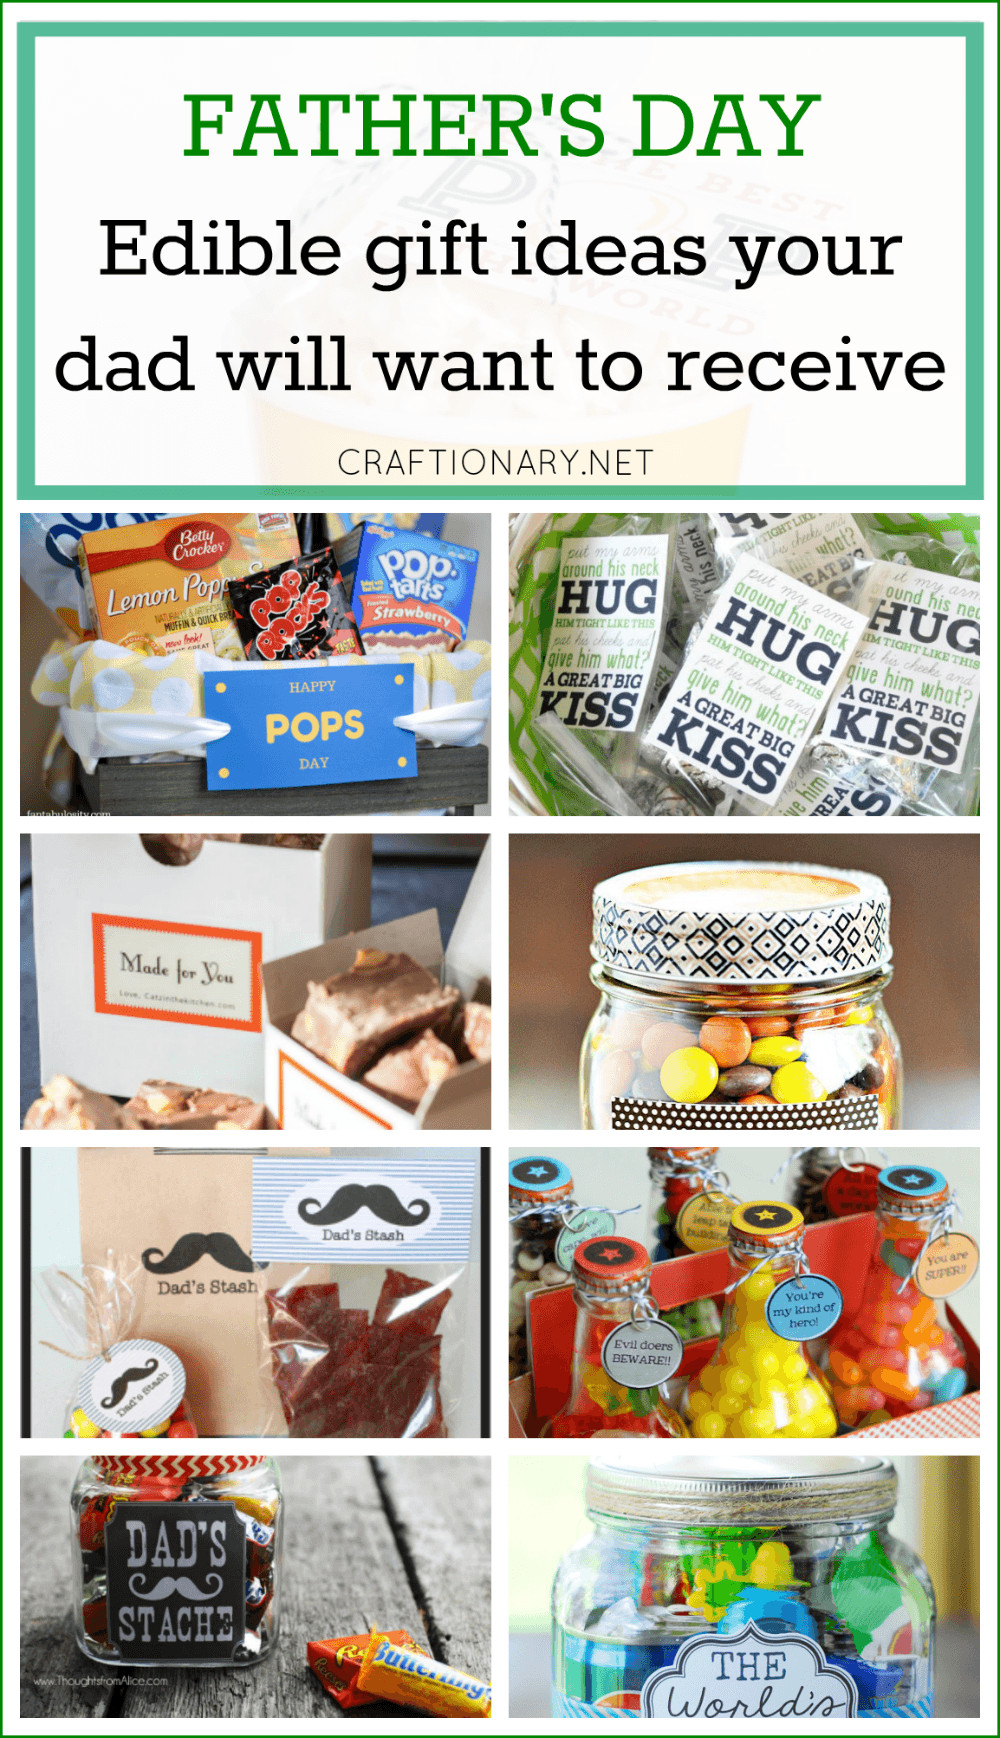 Fathersday Gift Ideas
 Craftionary